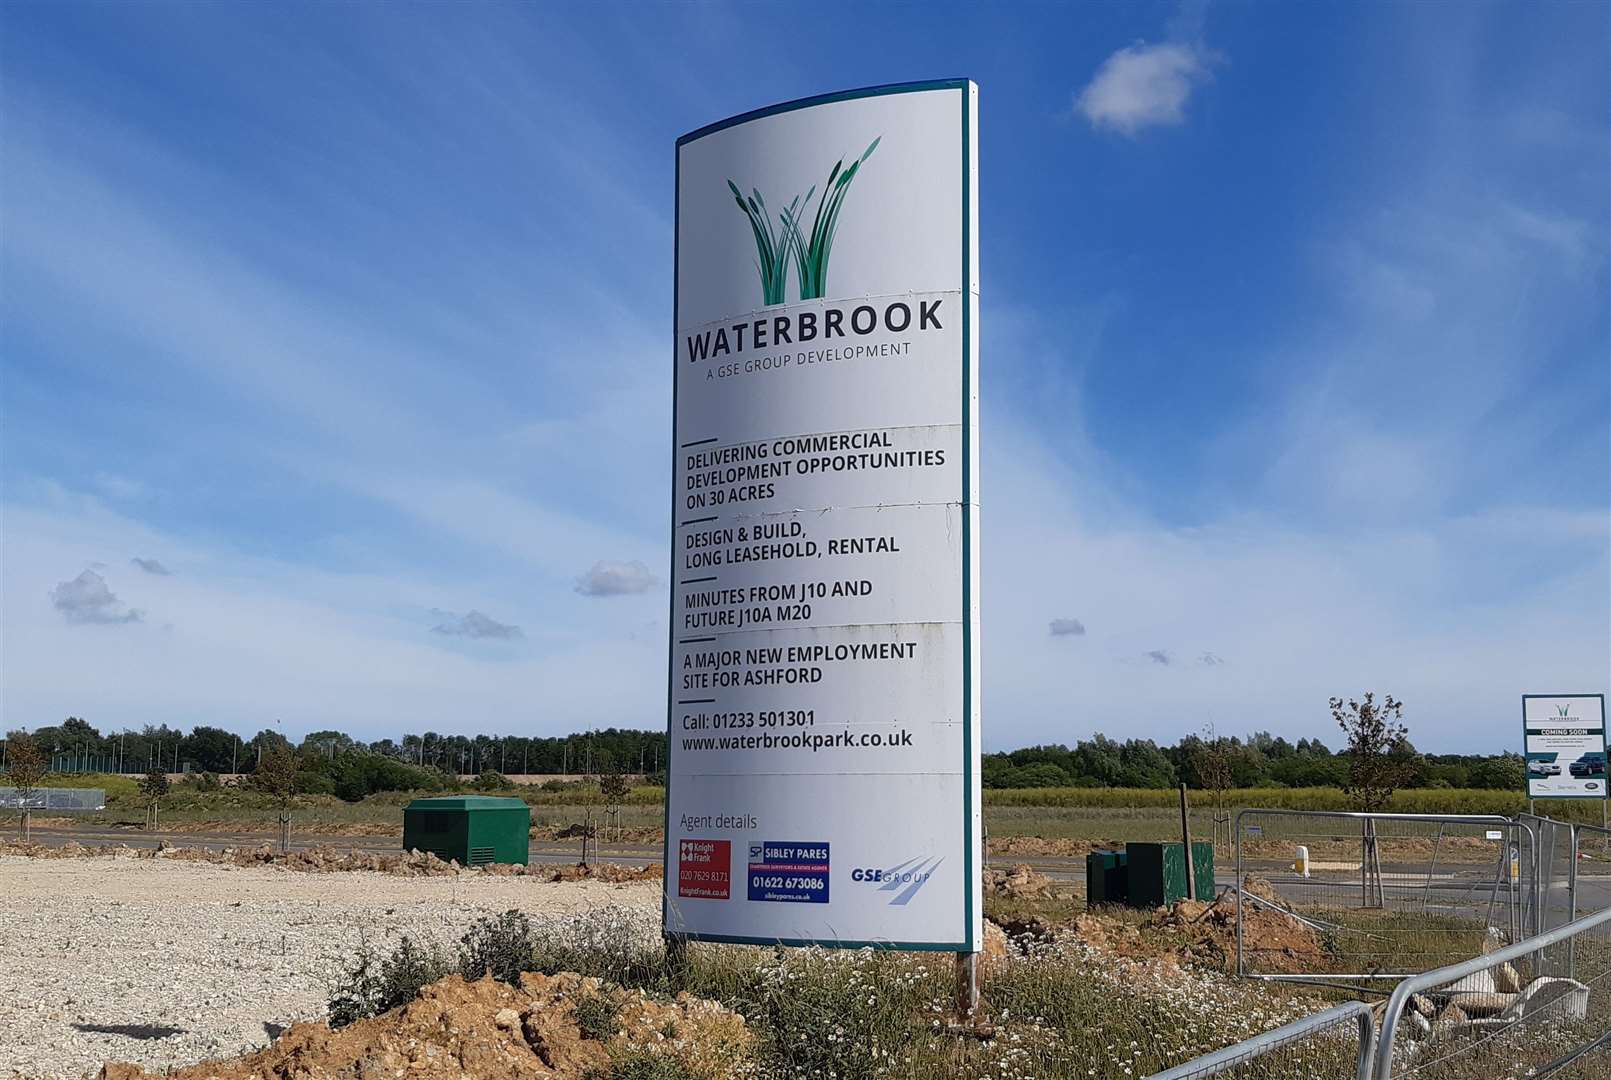 Waterbrook Park will ultimately become a major mixed-use development across the sprawling site